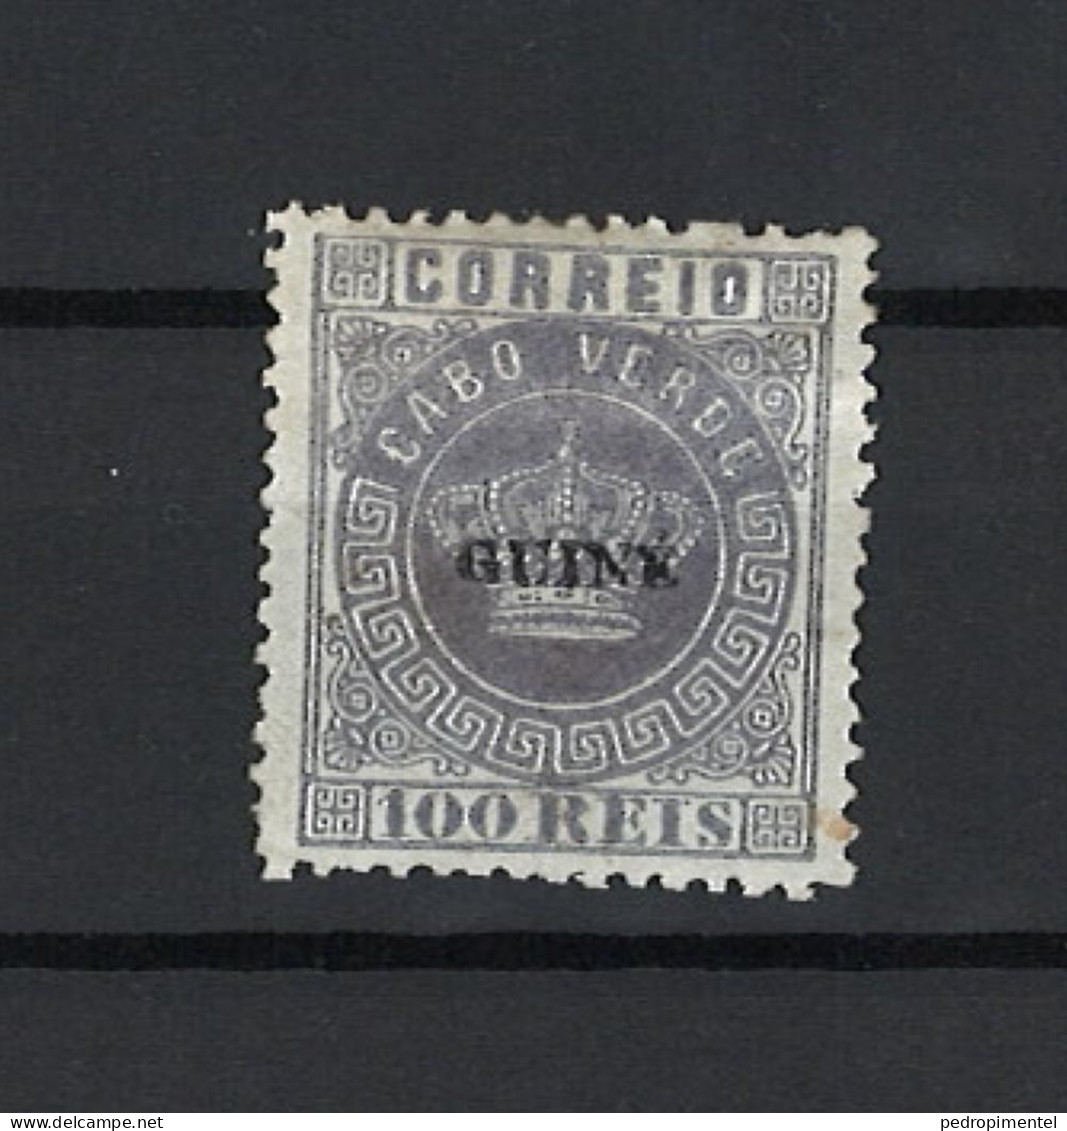 Portugal Guinee 1879-82 First Issue (Crown With Small GUINE Surcharge) 100 Reis Condition MH NGAI Mundifil Guinee #7 - Portugees Guinea